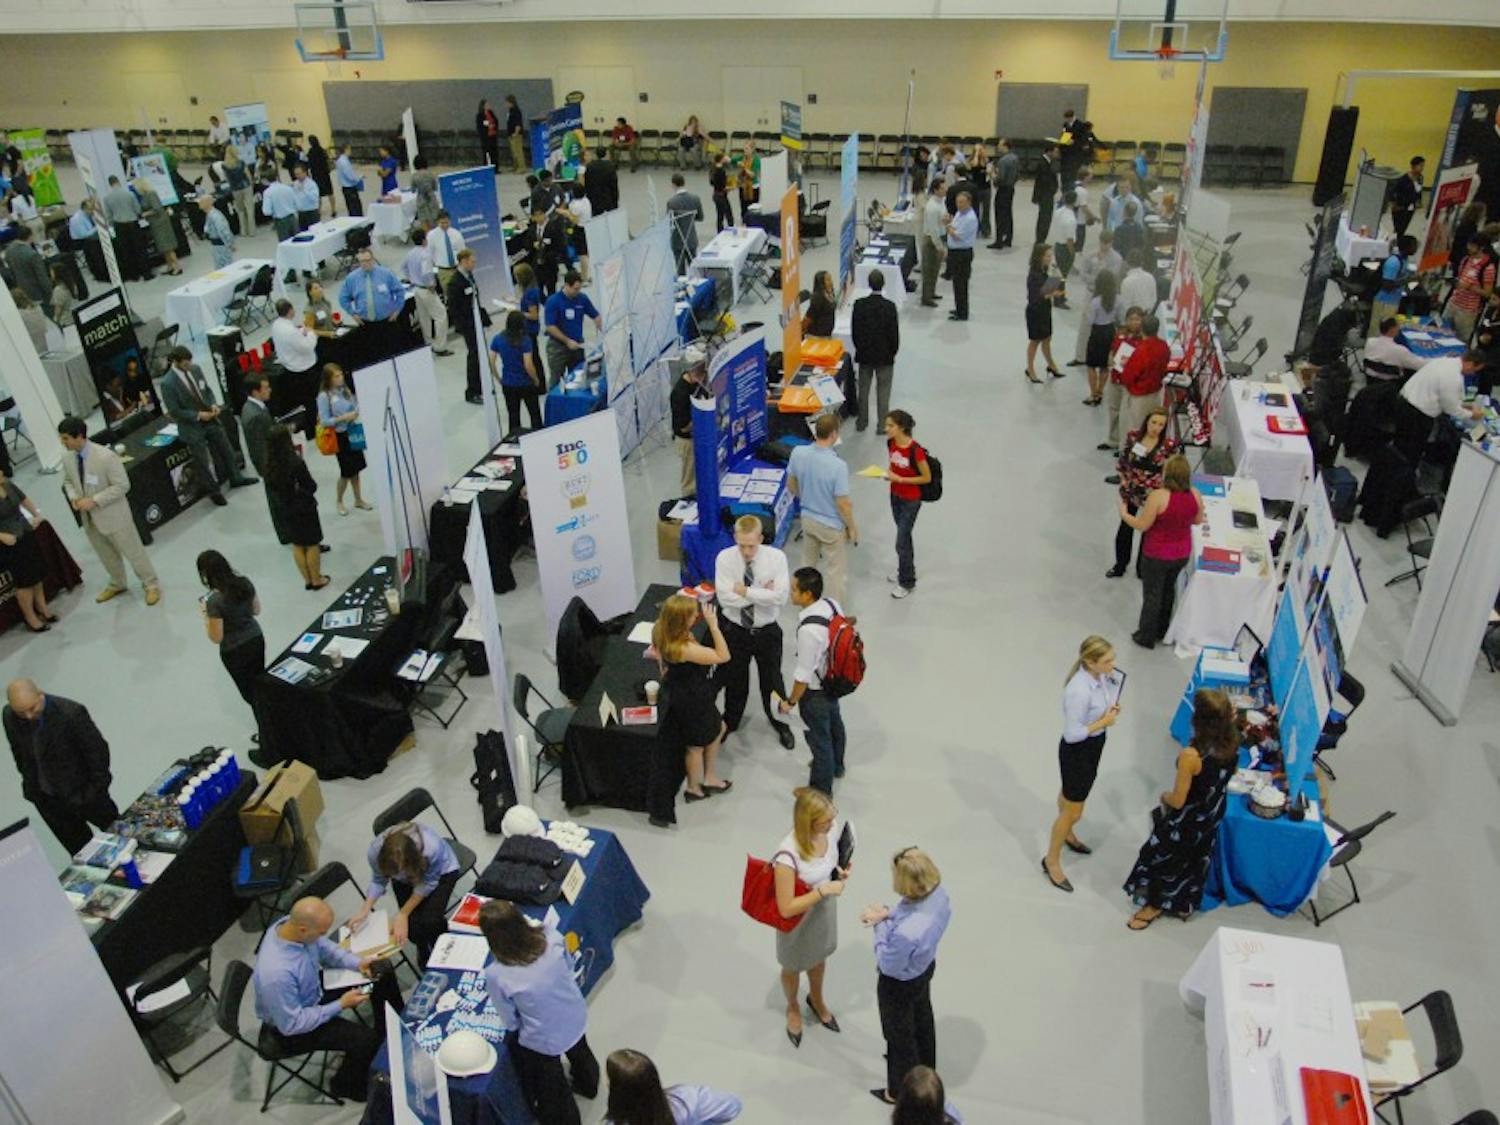 University Career Services hosts the first of its two career fairs for the year in Rams Head Recreation Center on Thursday. More than 90 businesses came to campus to try to attract students to a wide range of jobs.